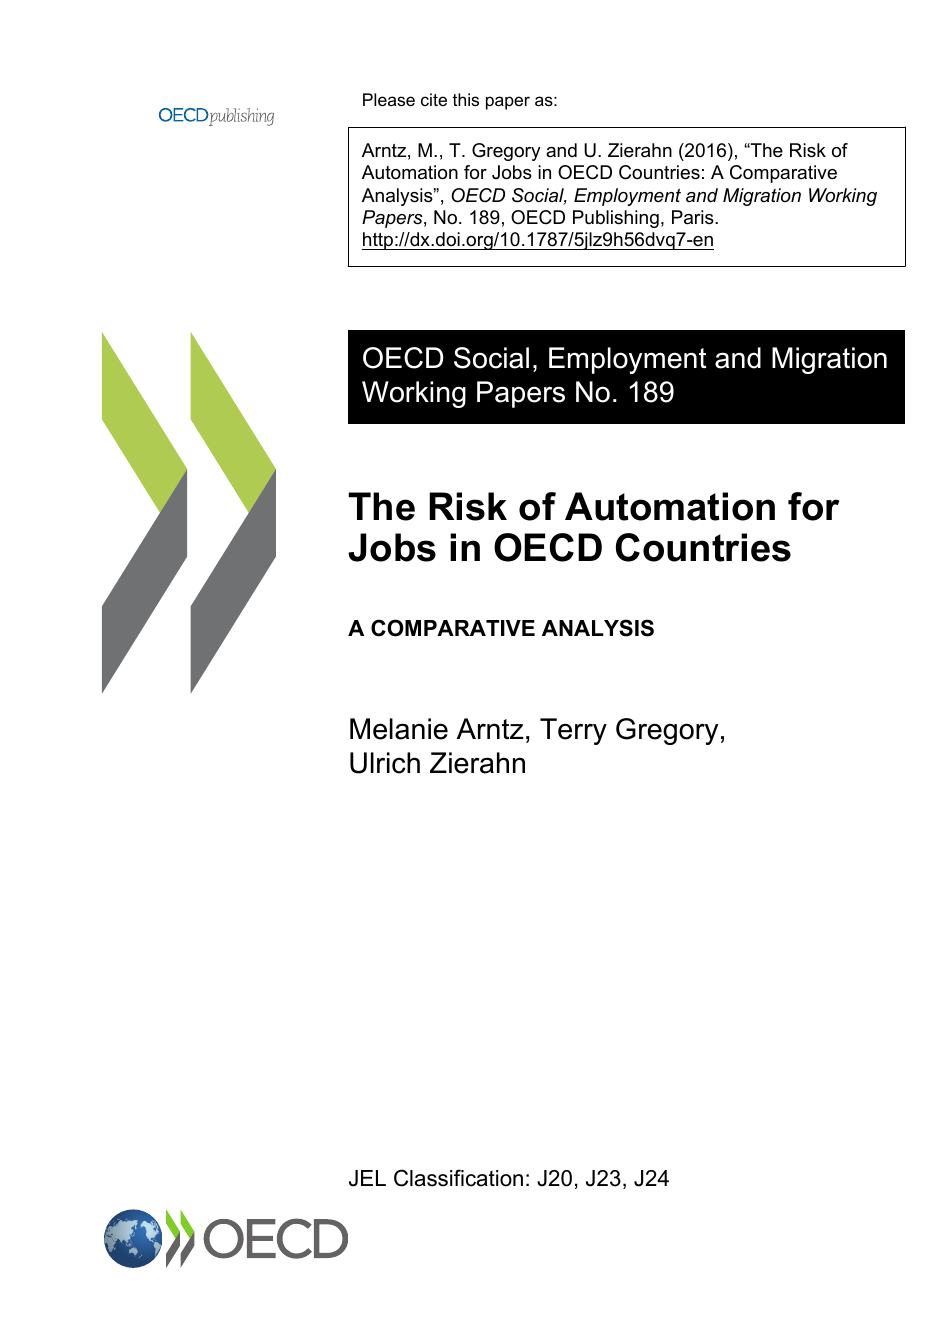 The Risk of Automation for Jobs in Oecd Countries图像预览